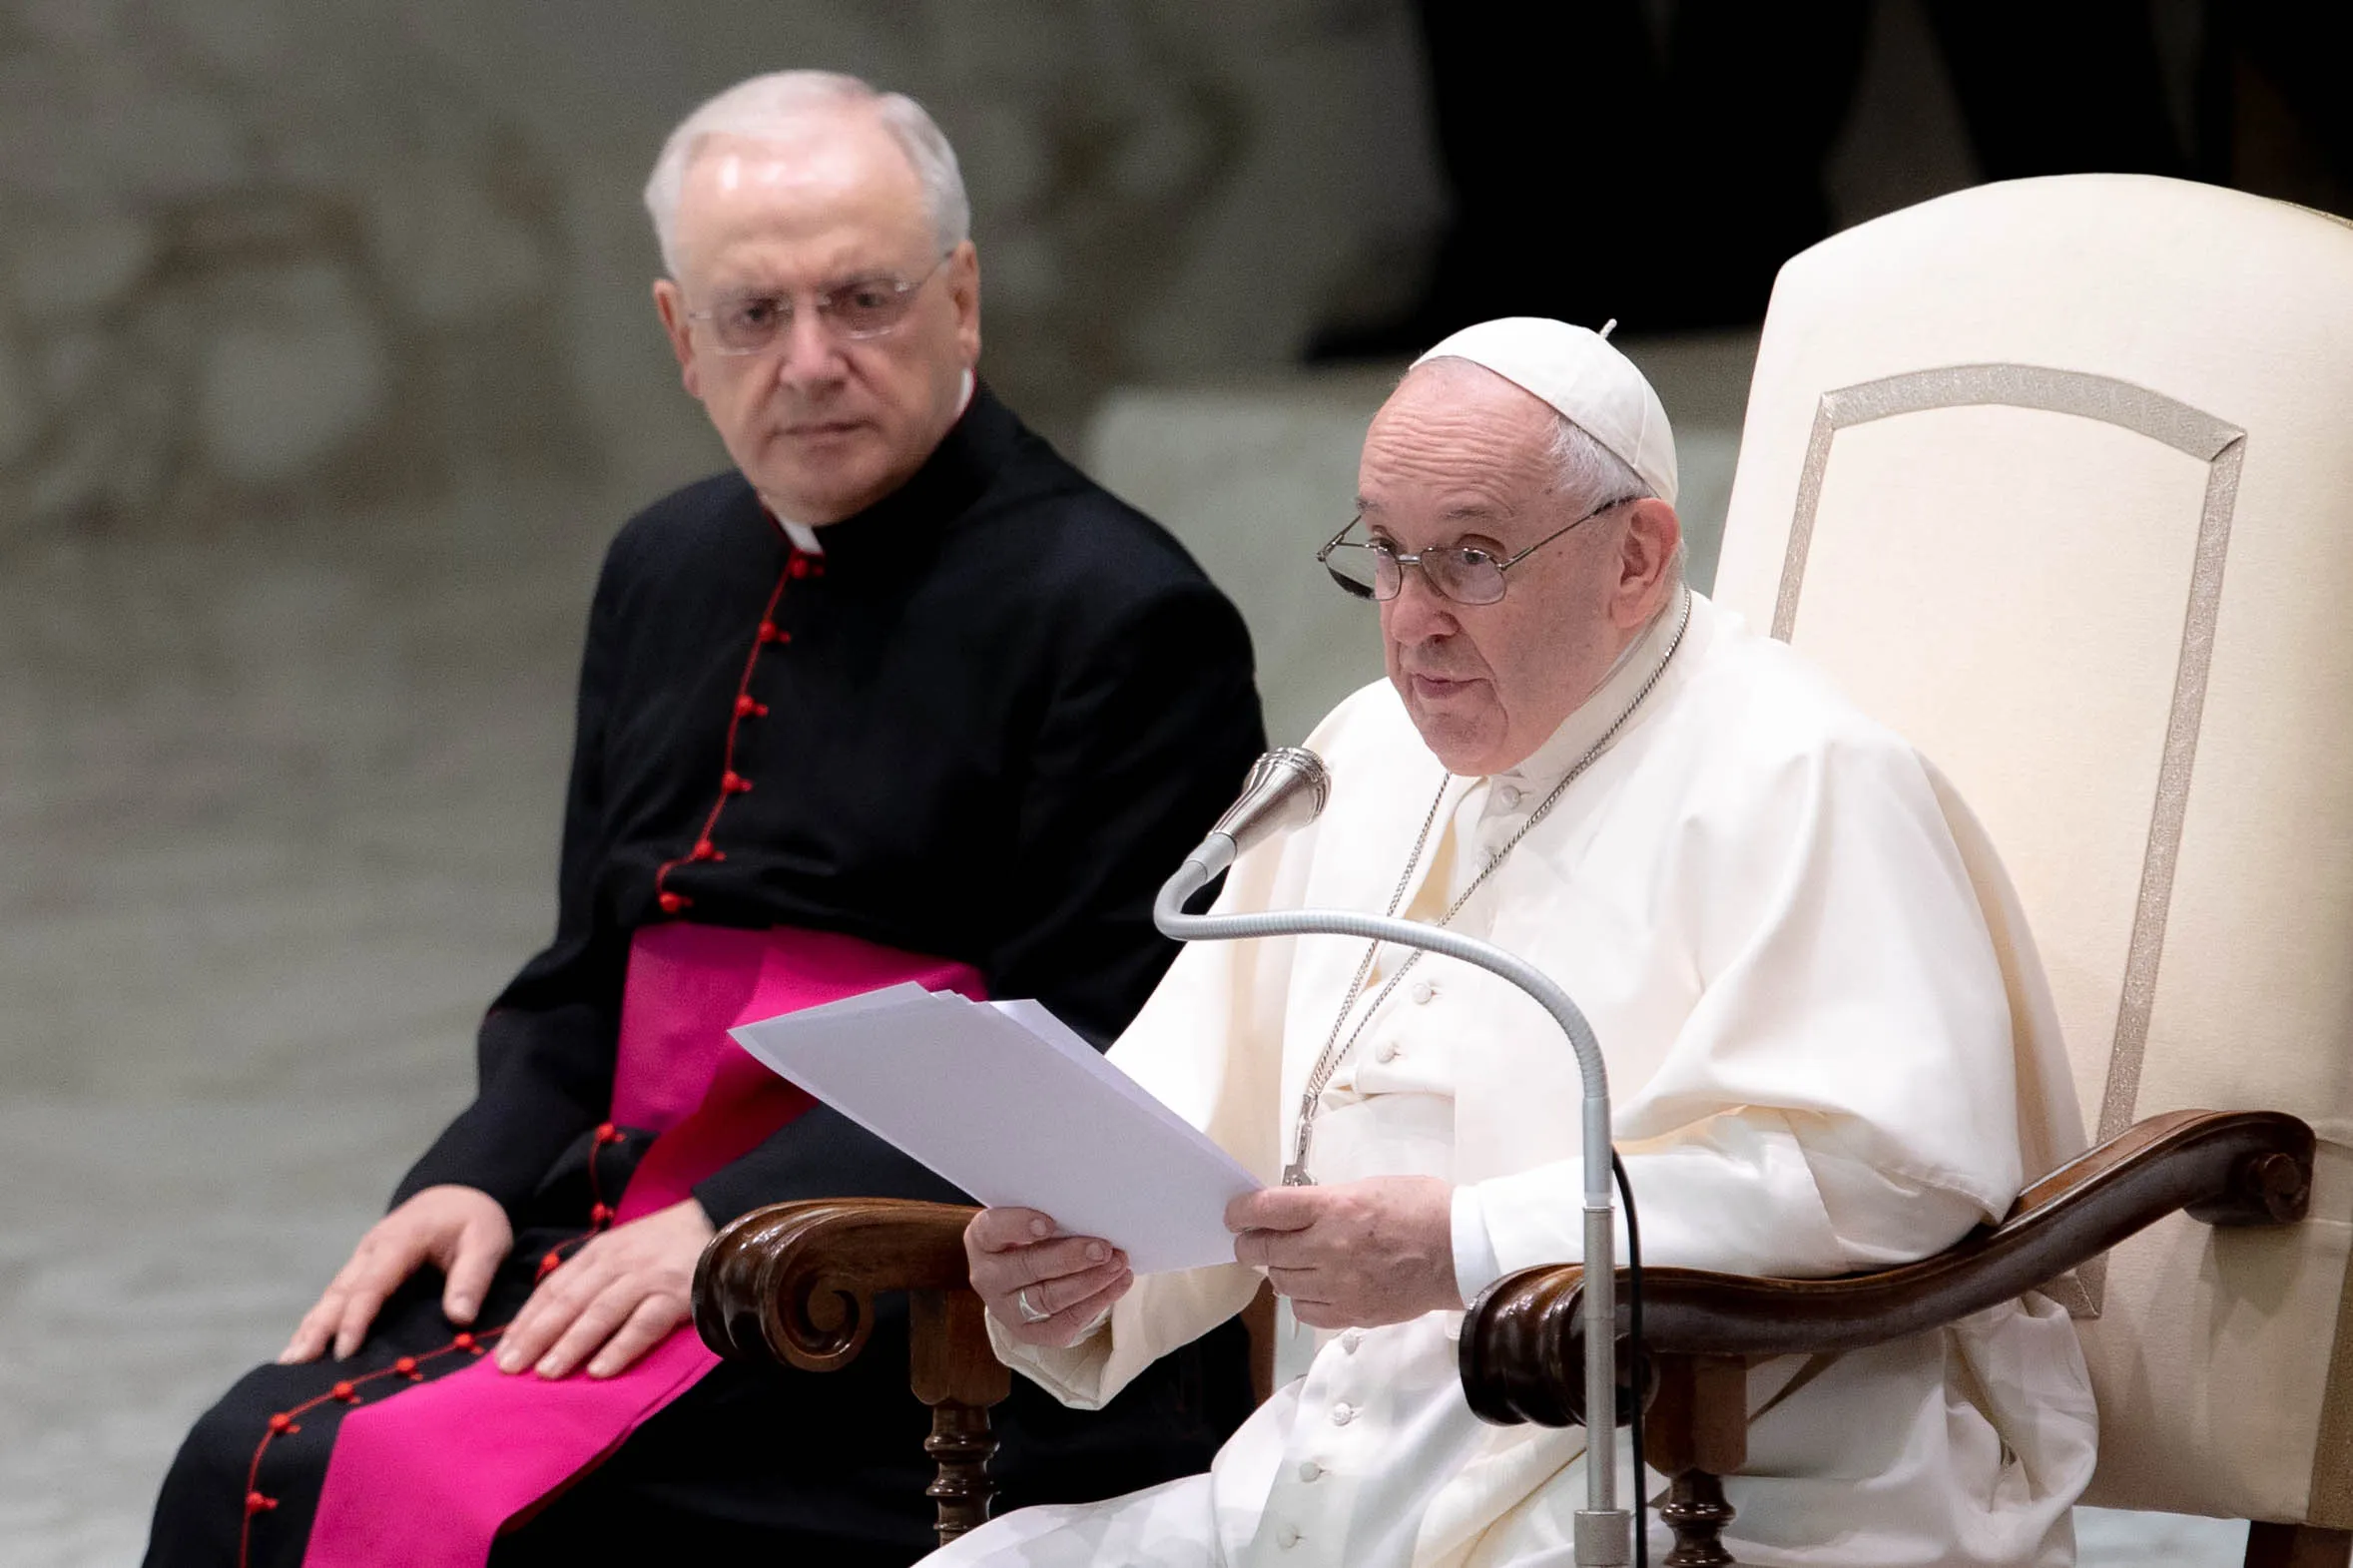 Pope Francis gives his general audience address in the Paul VI Hall of the Vatican Oct. 27, 2021?w=200&h=150